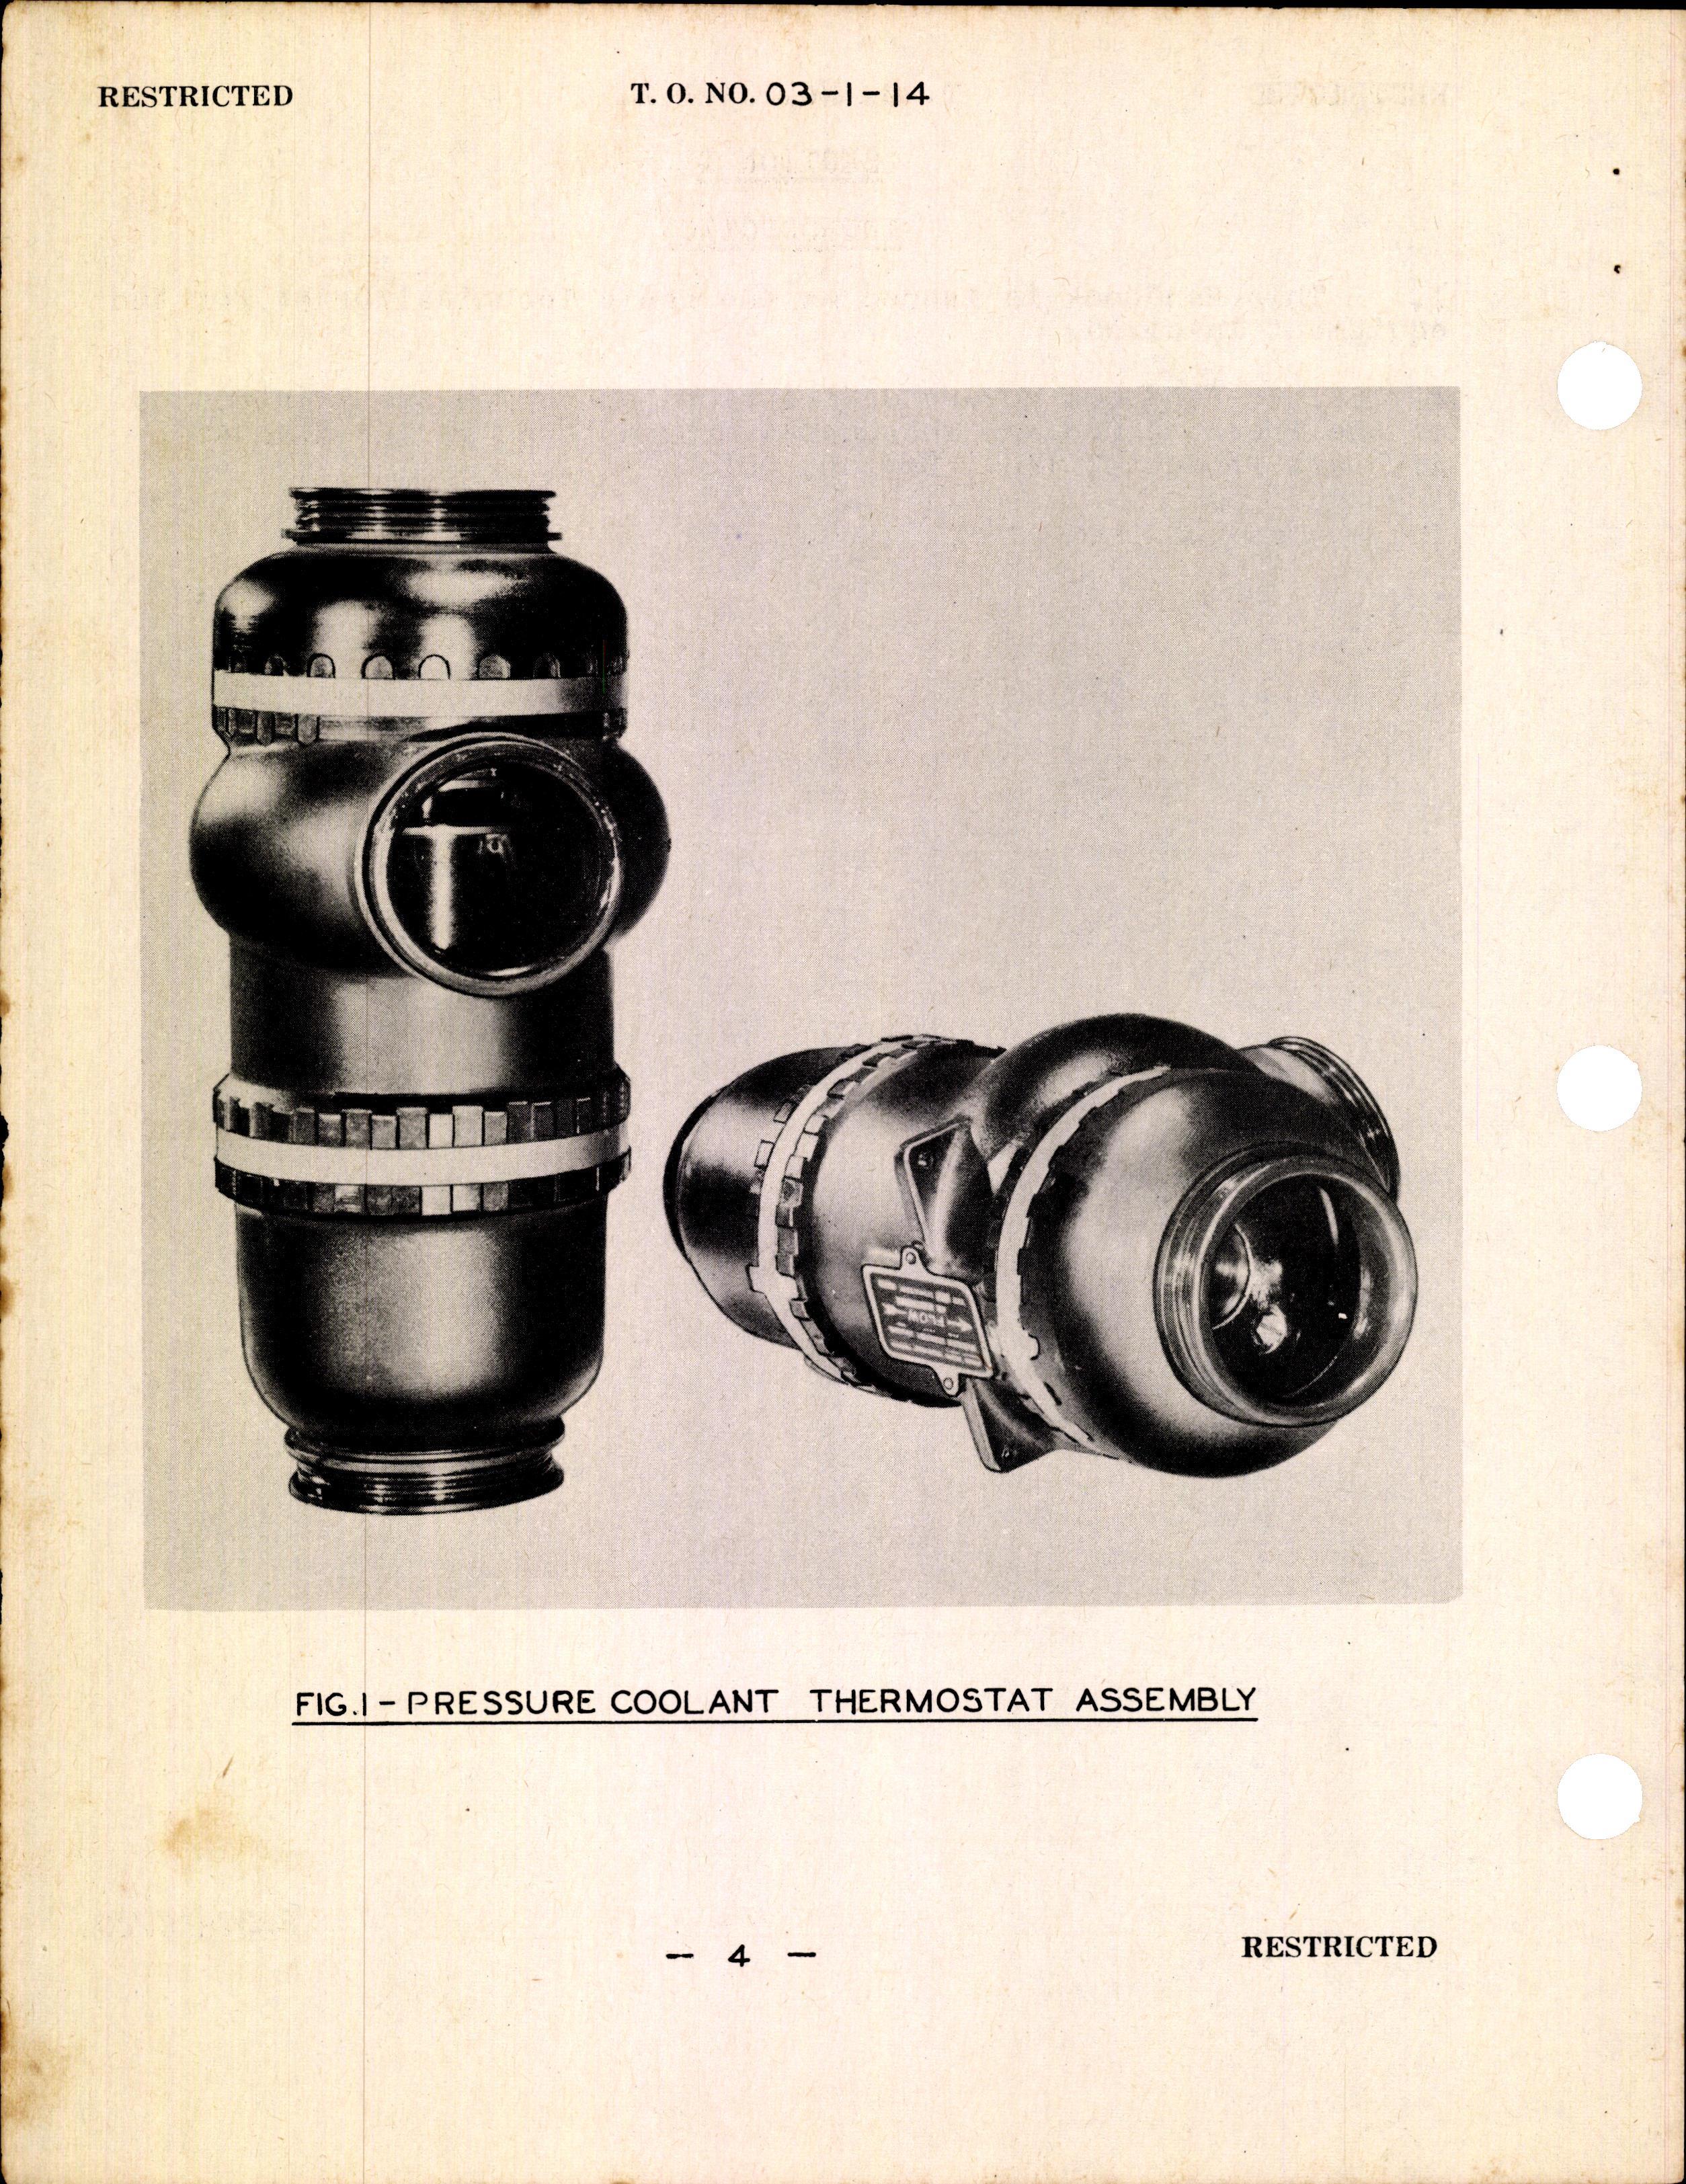 Sample page 6 from AirCorps Library document: Handbook of Instructions with Parts Catalog for the Pressure Coolant Thermostat